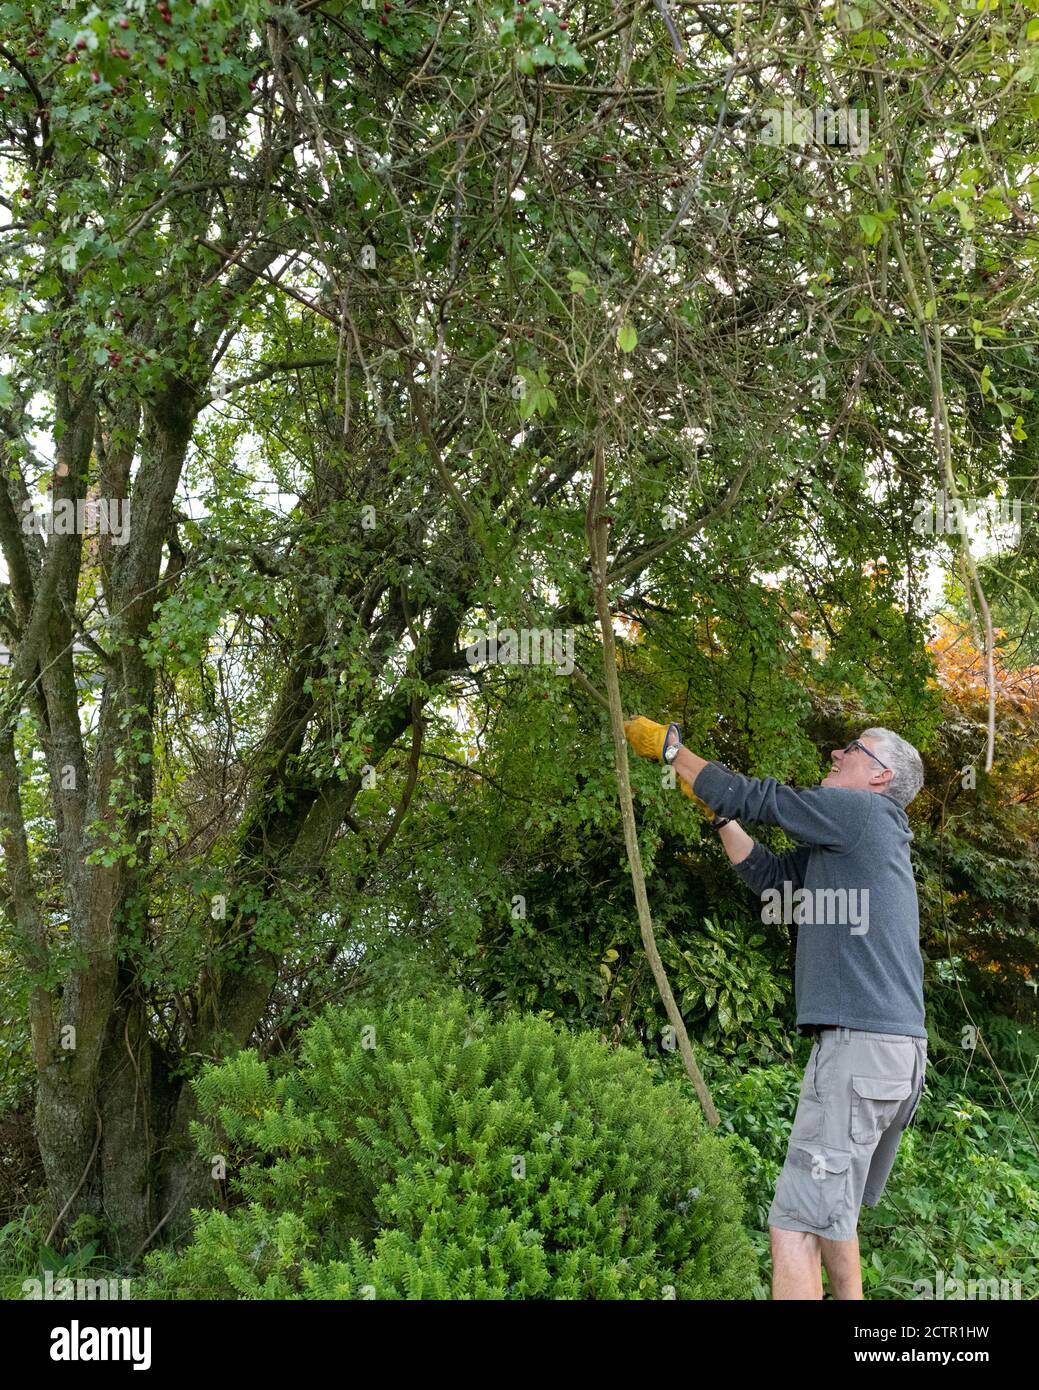 Pruning or renovating a rambling rose that is outgrowing a hawthorn tree by removing several of the oldest stems - see image 2C86P01 to see before Stock Photo